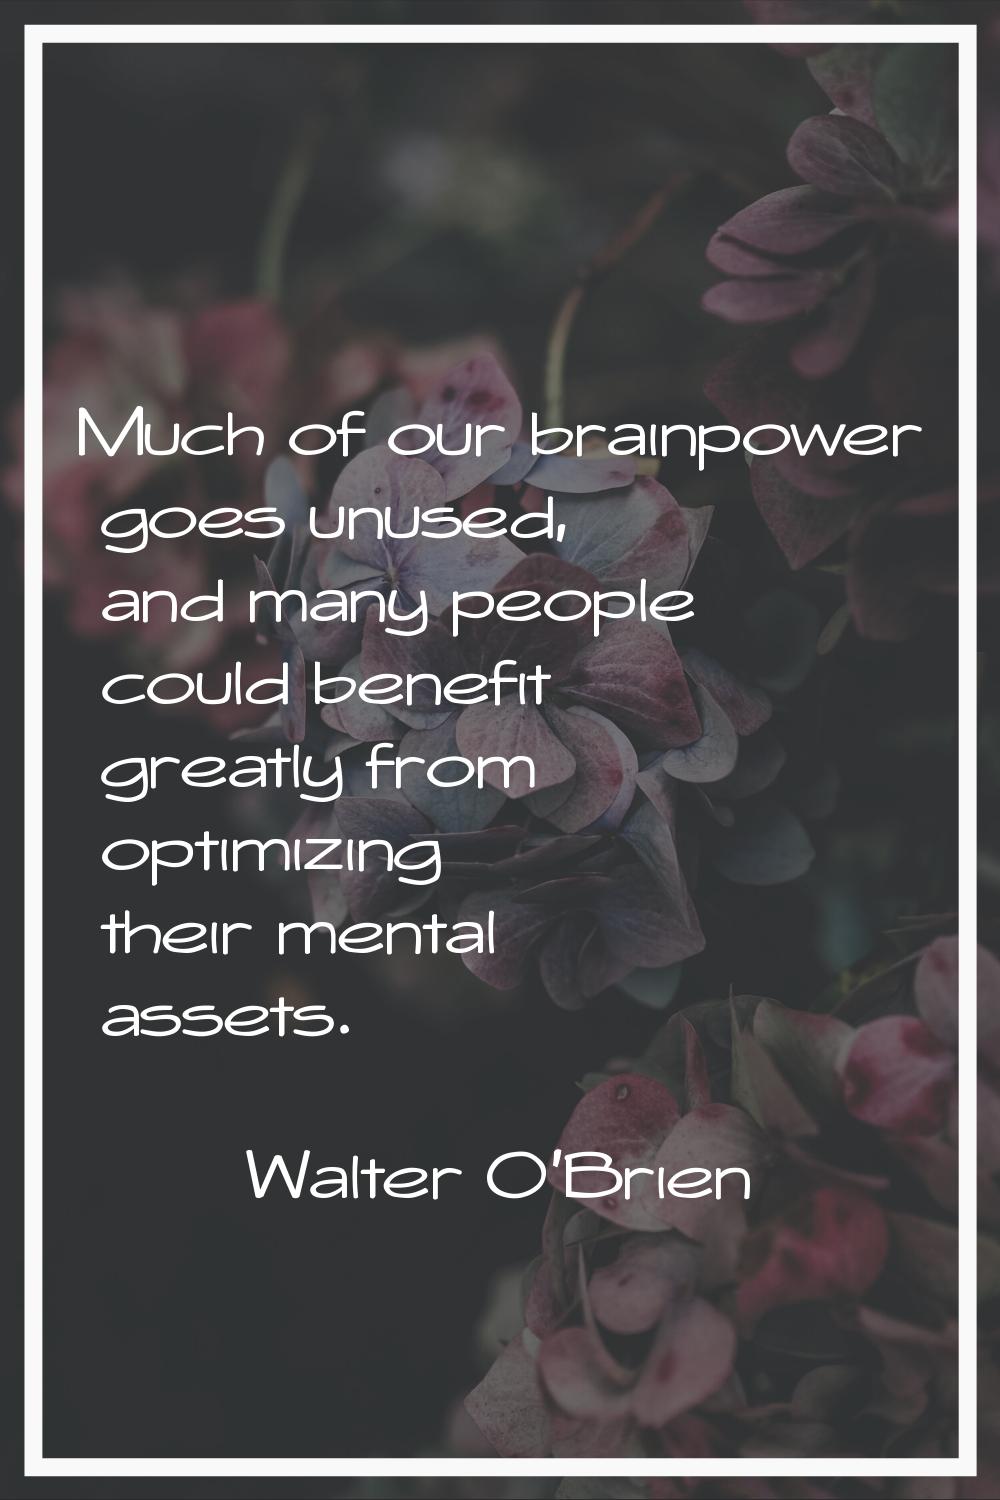 Much of our brainpower goes unused, and many people could benefit greatly from optimizing their men